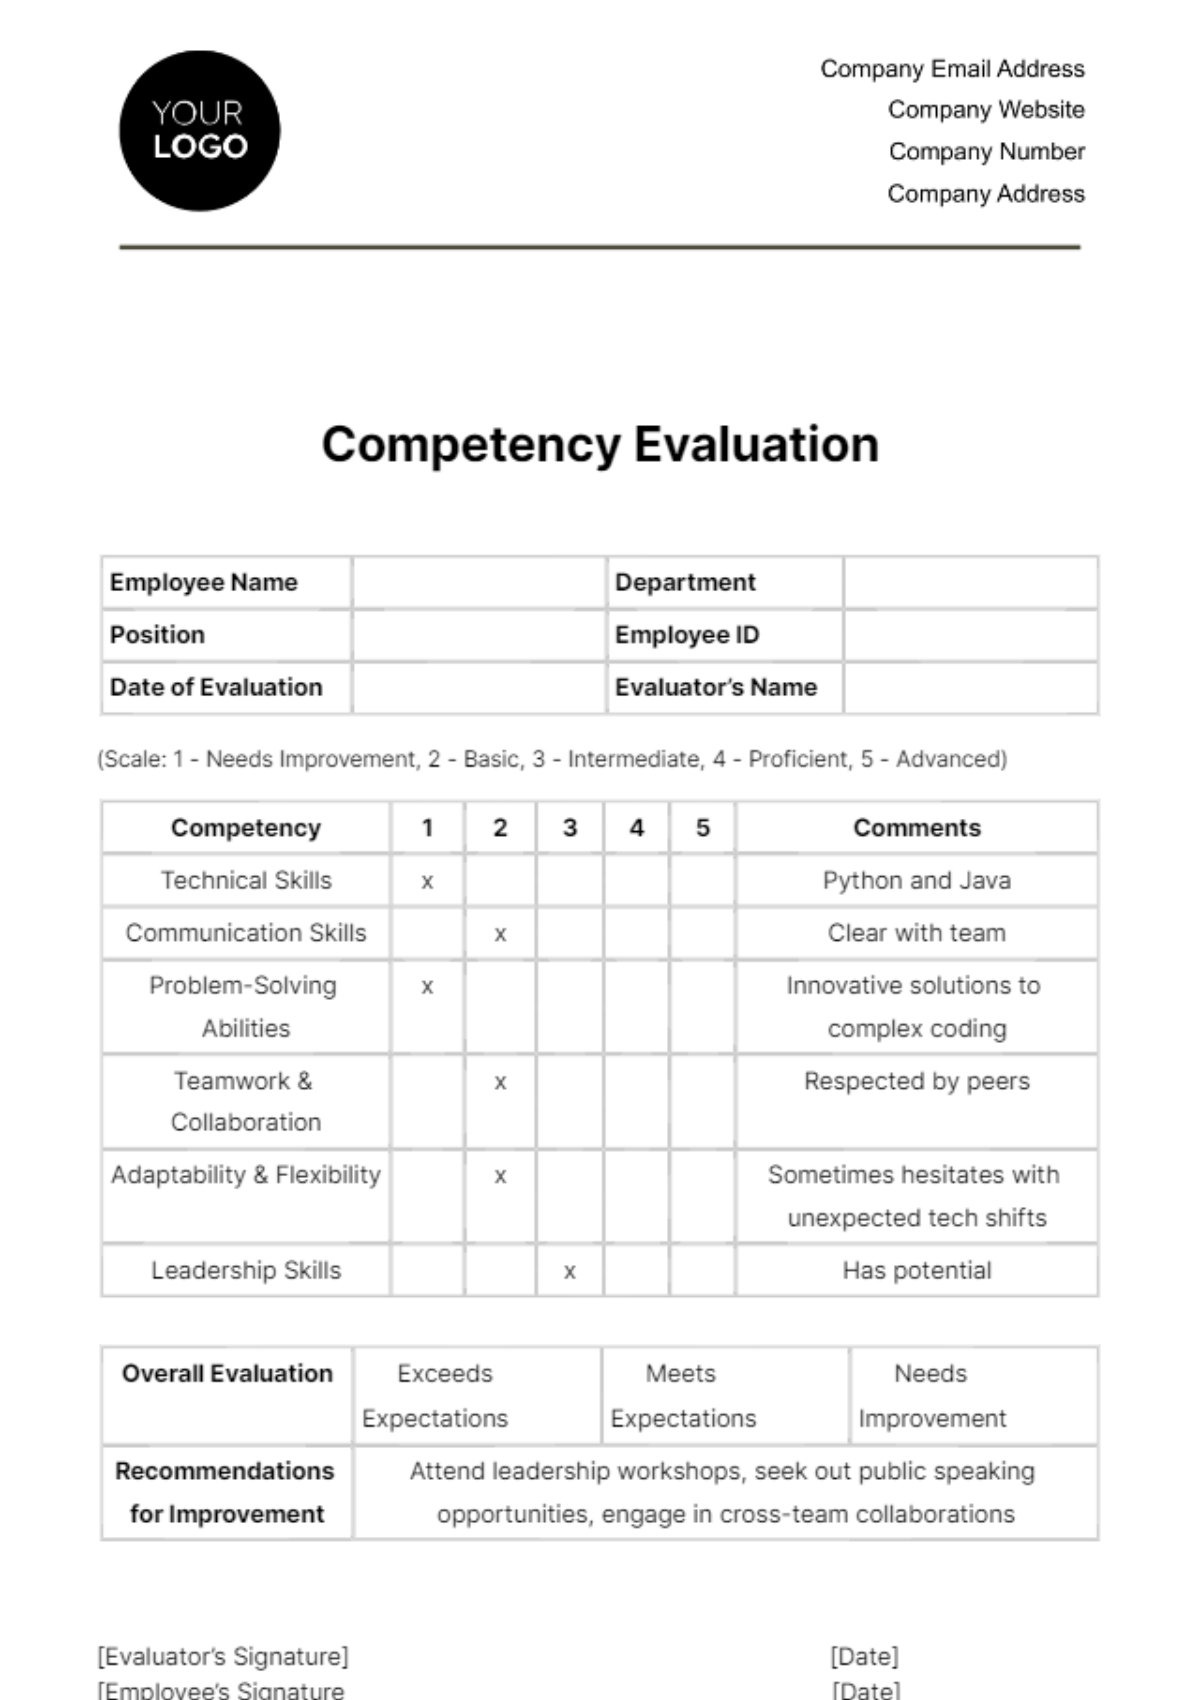 Competency Evaluation HR Template